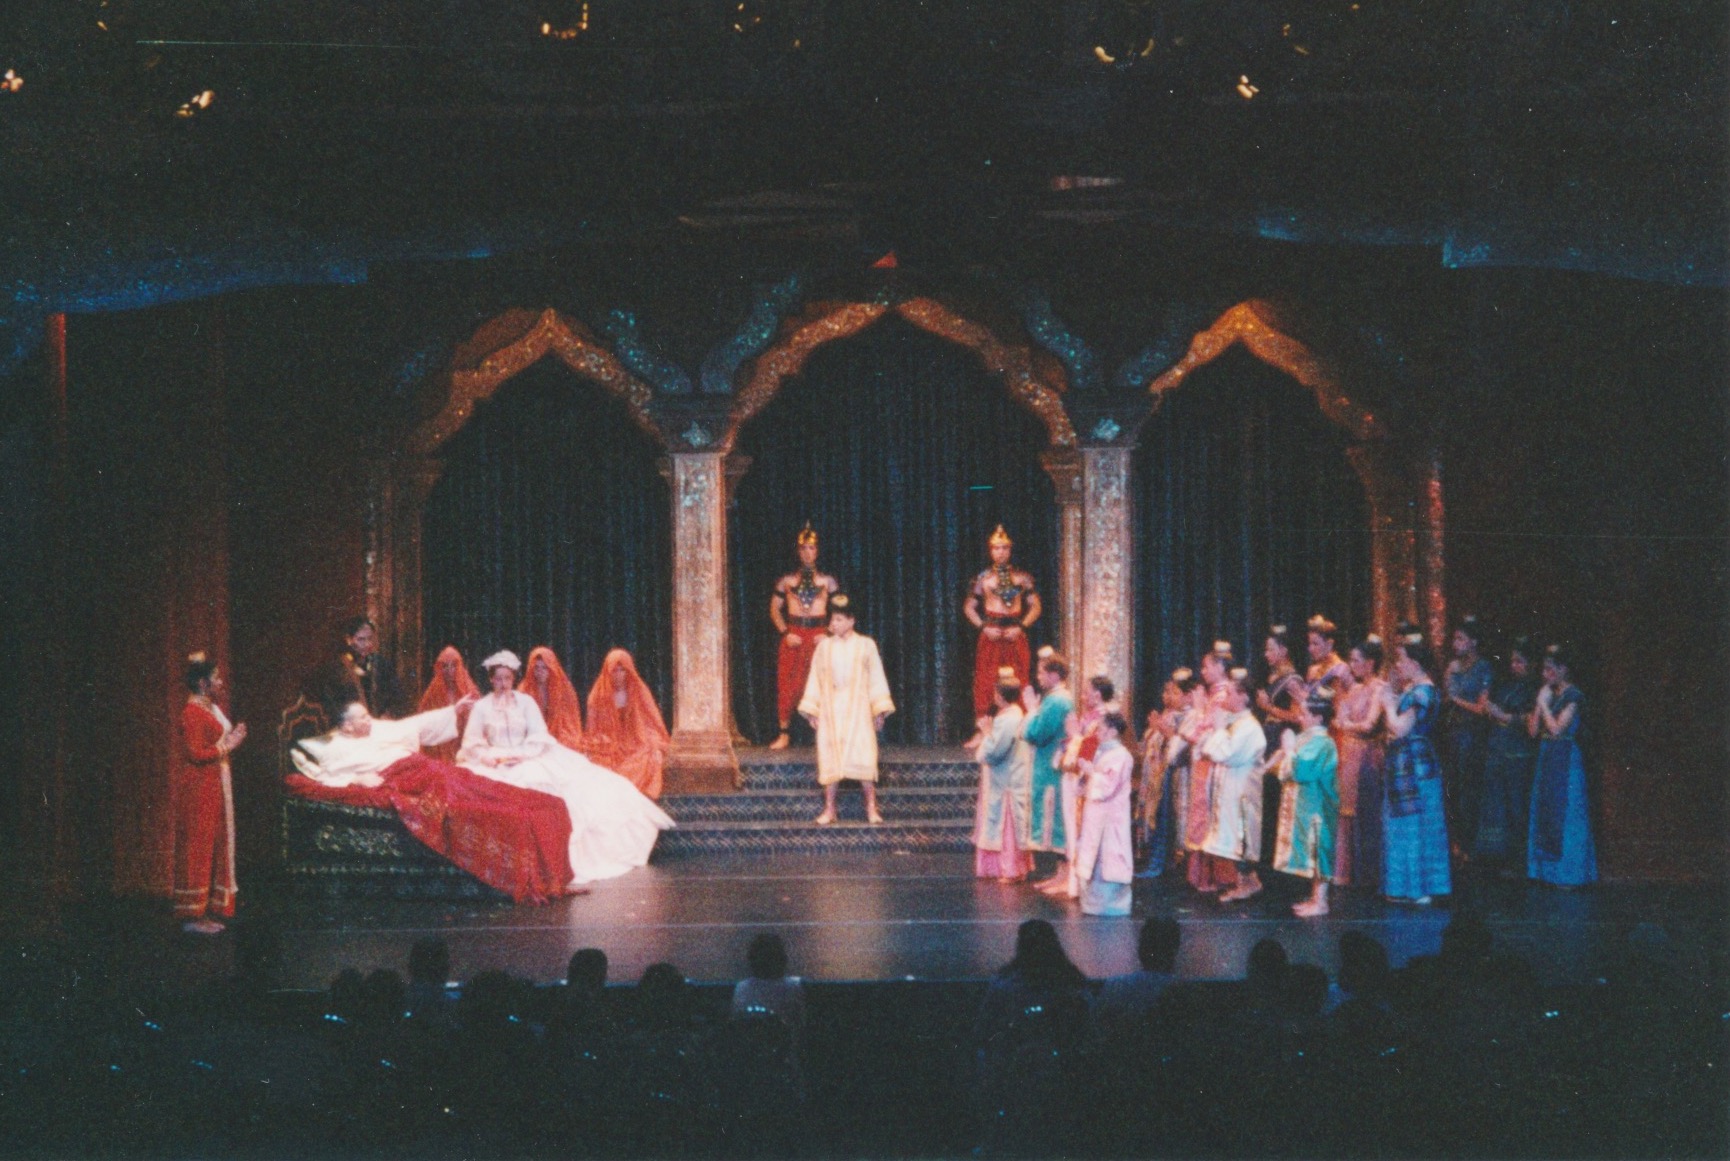 The Cast of The UTEP Dinner Theatre production of The King and I